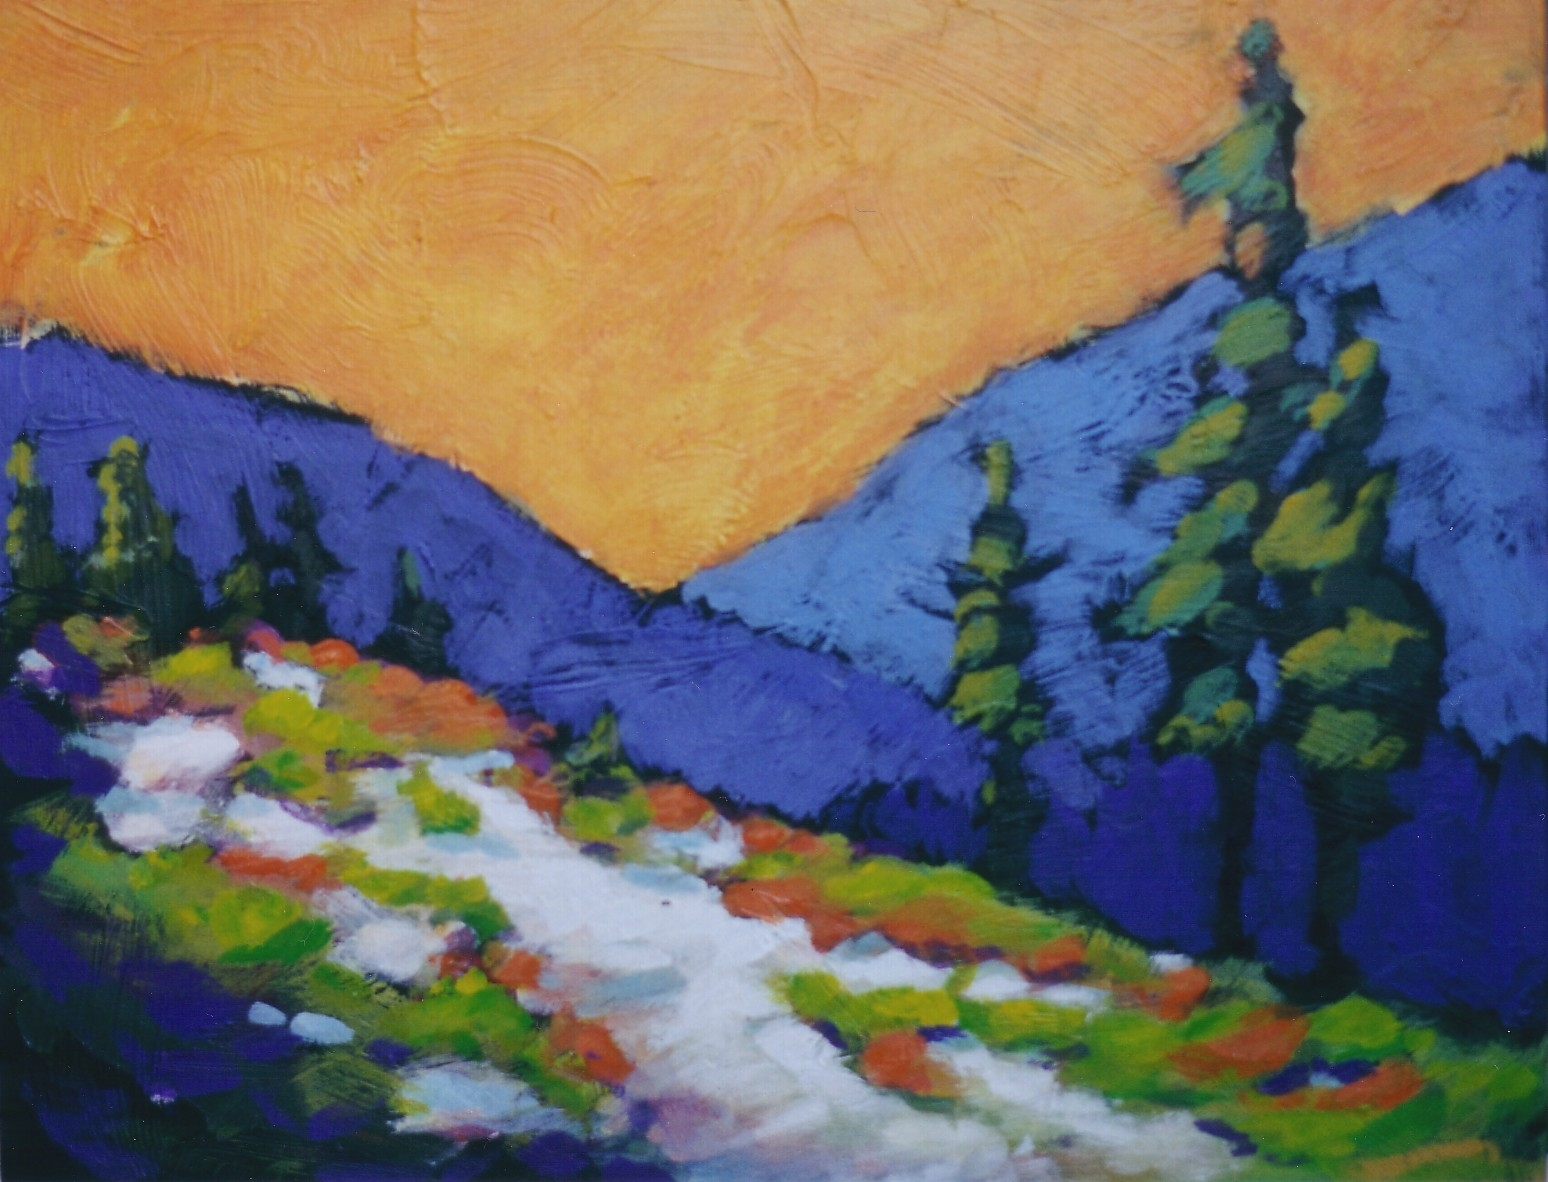 acrylic painting of a mountain with snow and trees